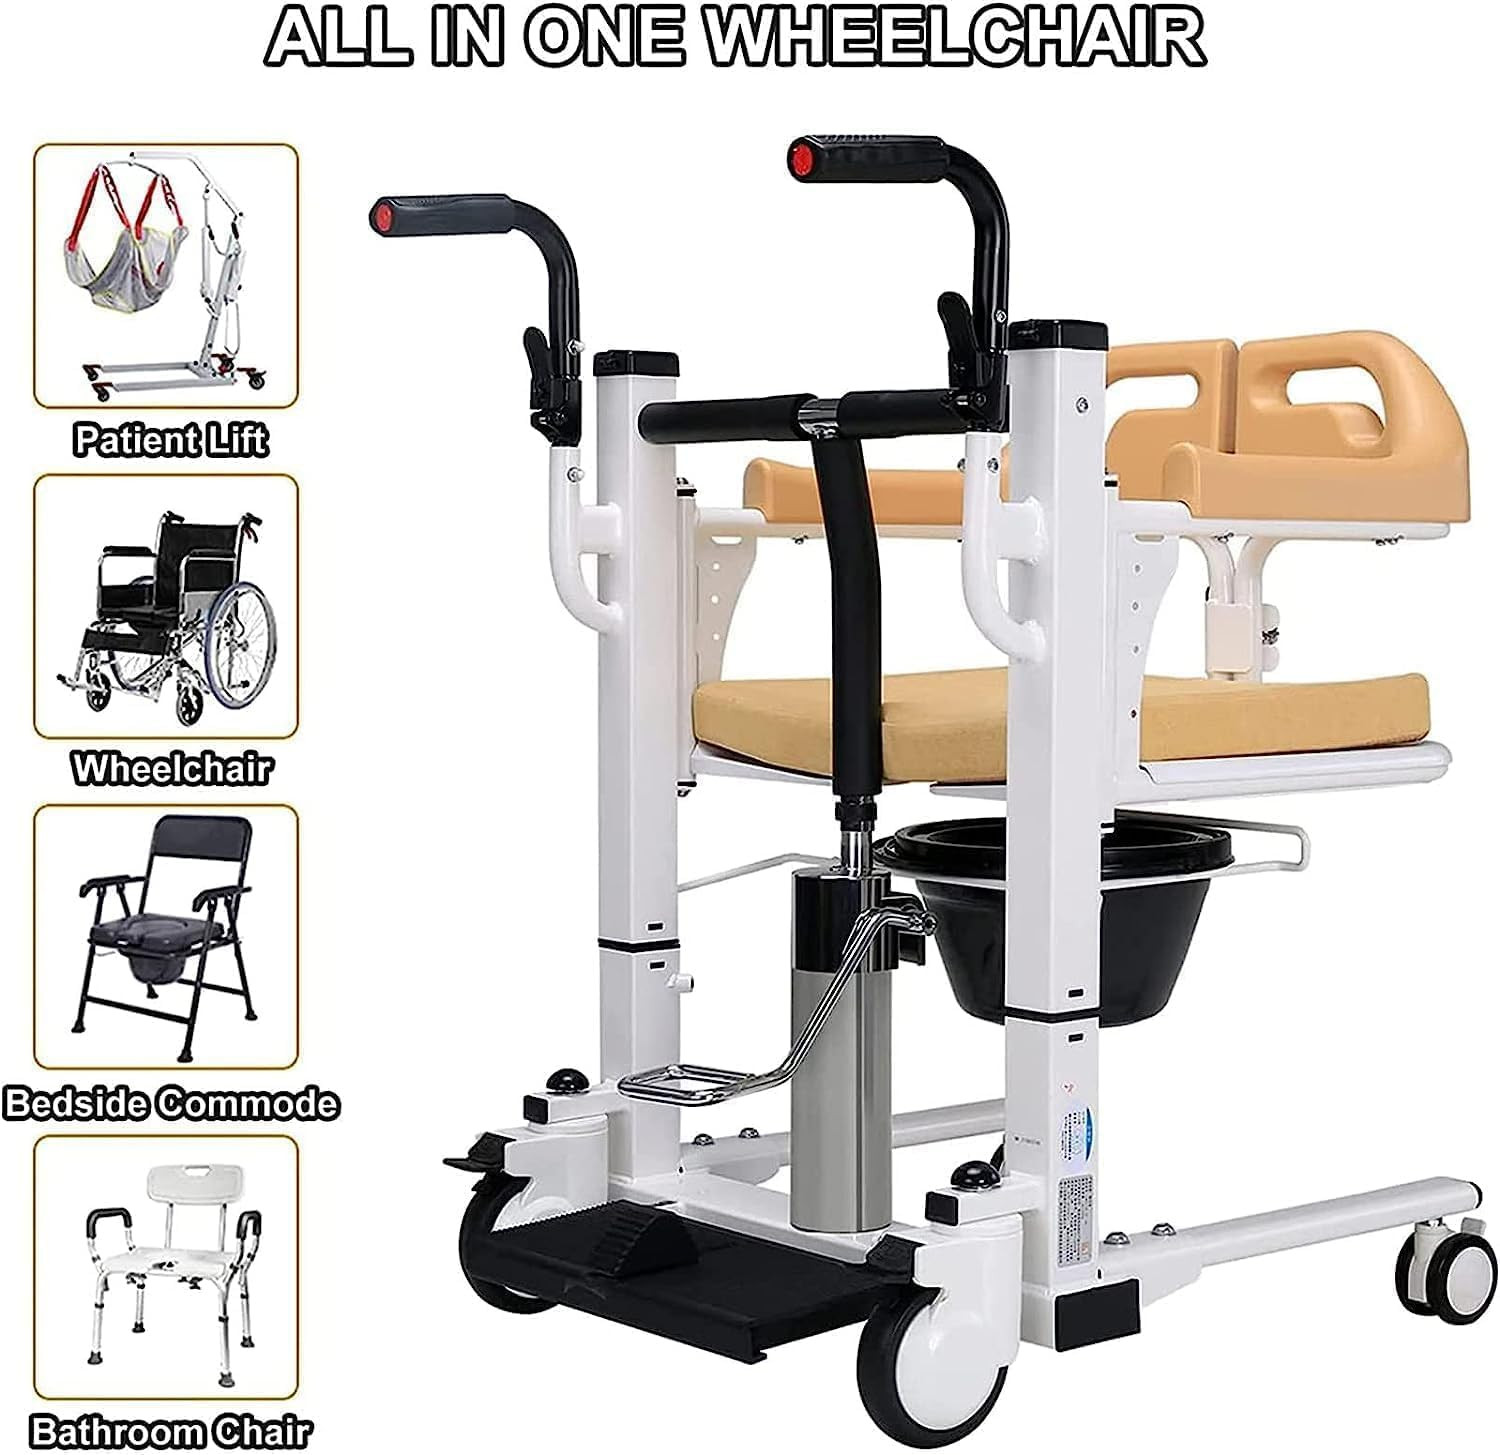 Hydraulic Patient Transfer Chair/ Hydraulic iMove/ Patient Transfer Wheelchair with Commode